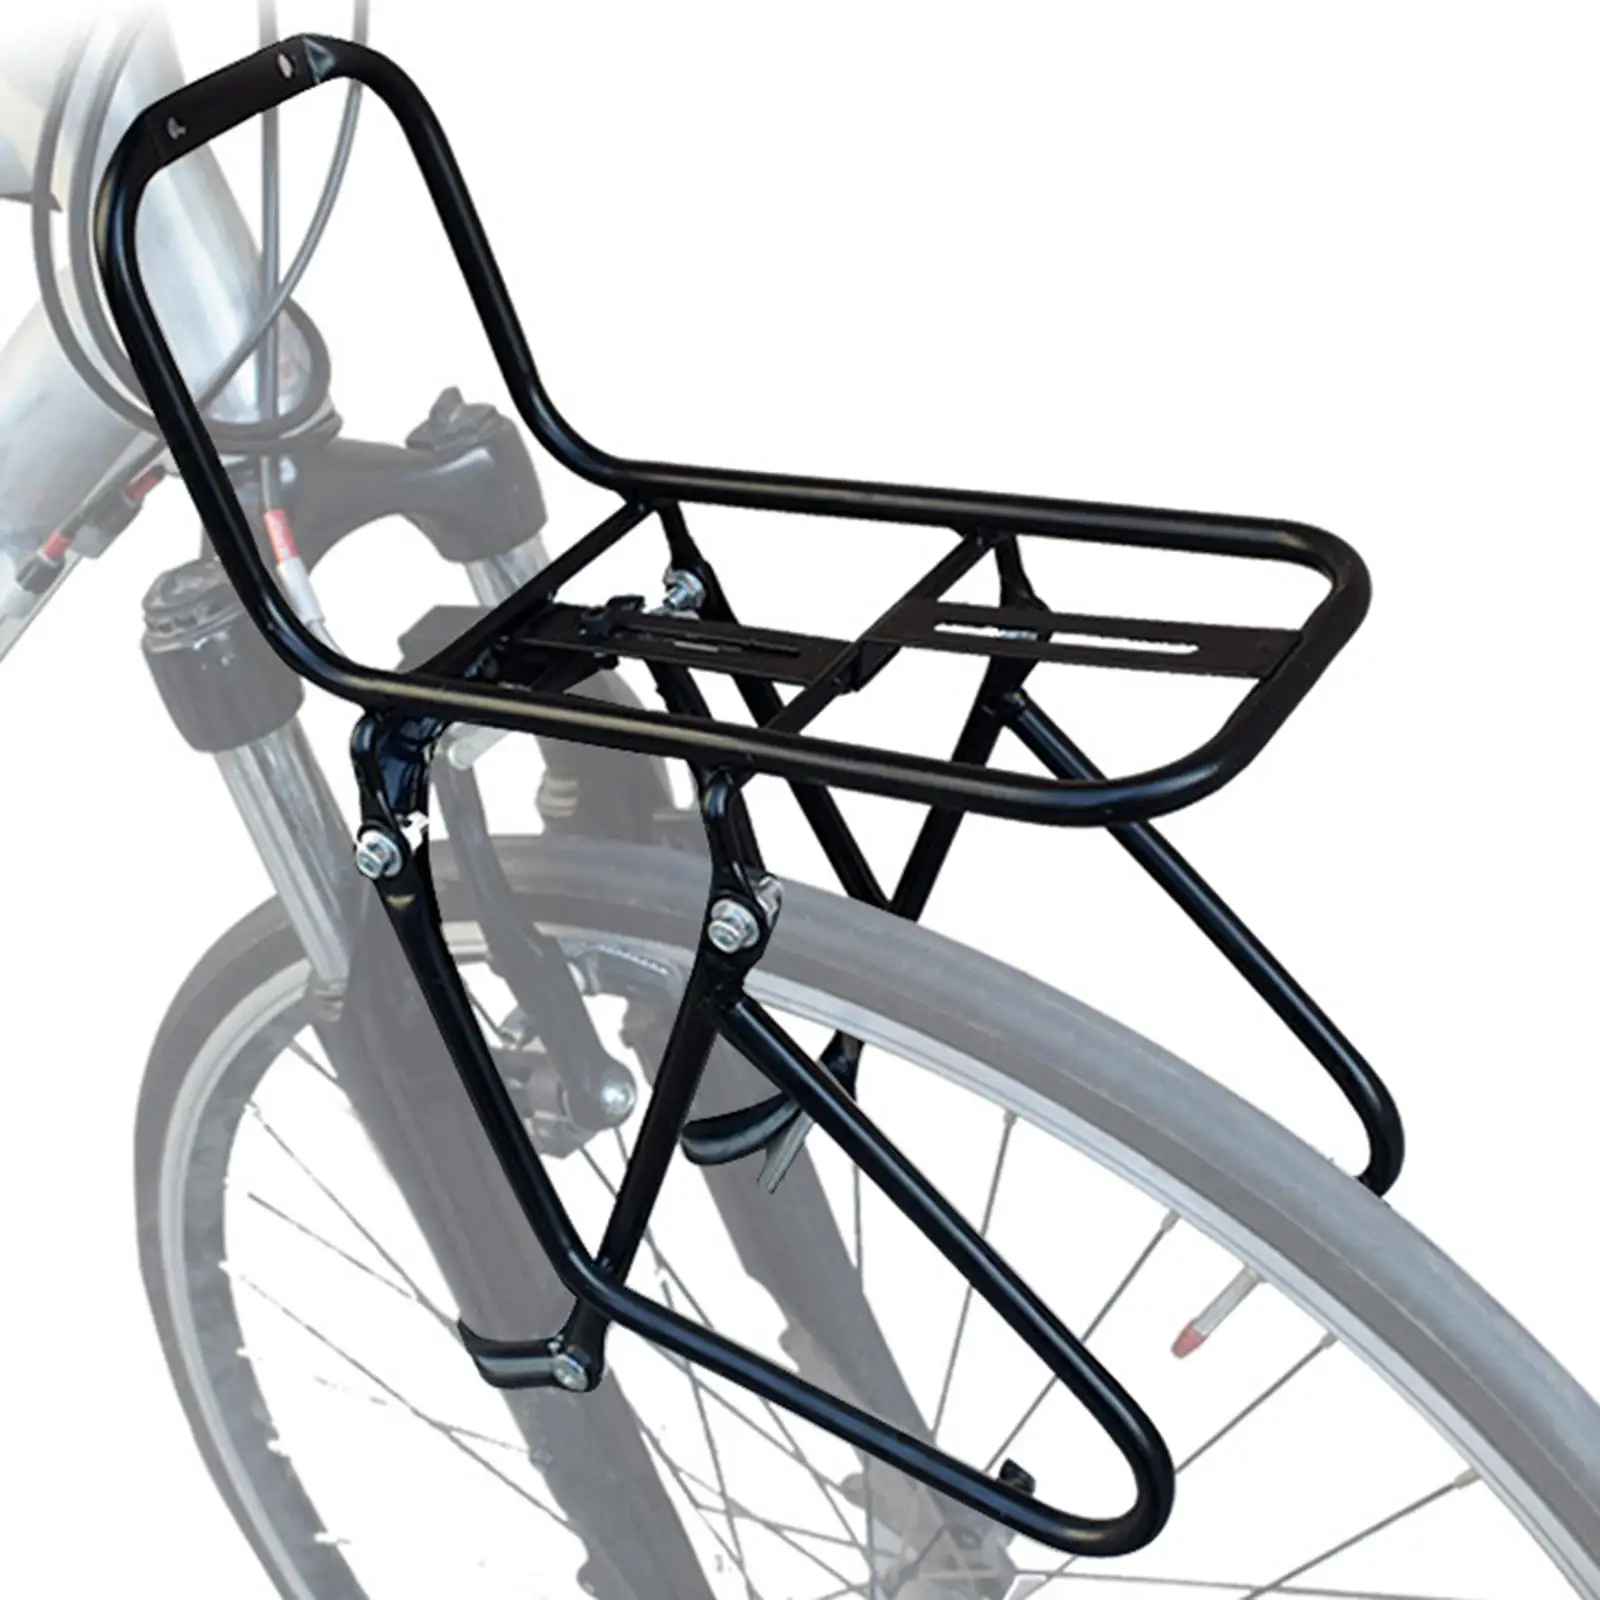 Bike Front Rack Bicycle Carrier Panniers Bag Basket Luggage Shelf Cargo Rack Durable Practical Sturdy Carrier for Mountain Bikes